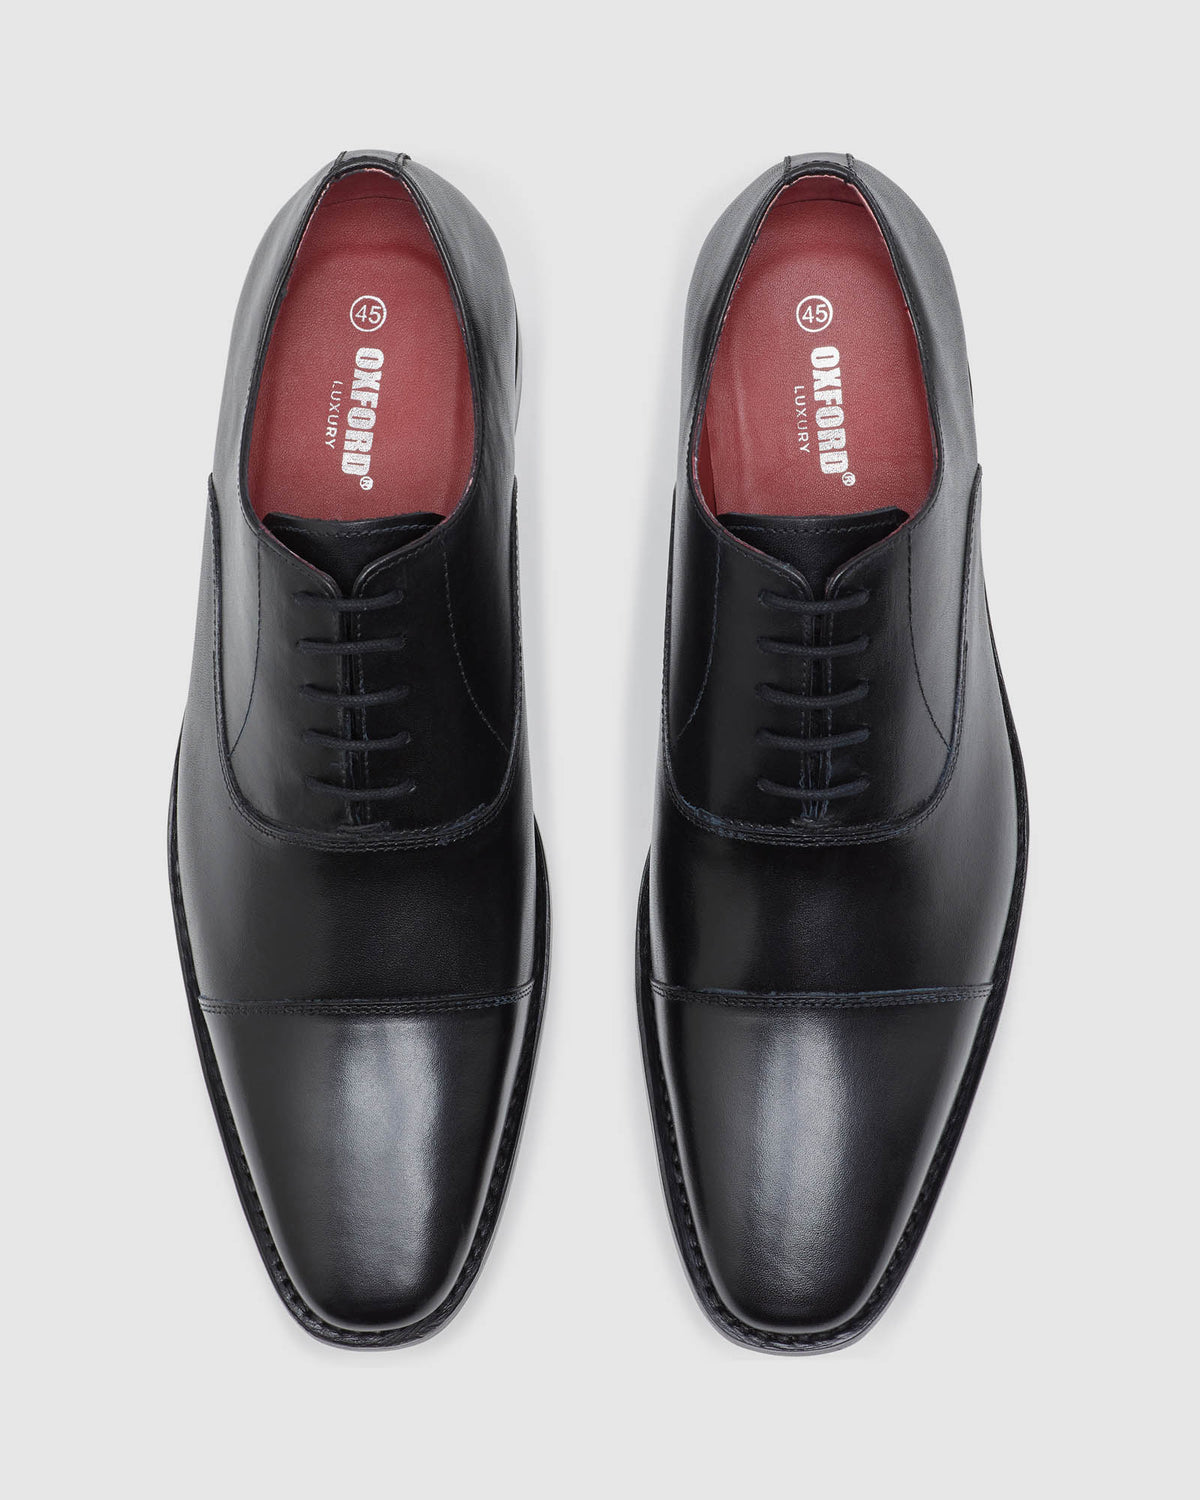 CHRISTOPHER GOODYEAR WELTED SHOES – Oxford Shop